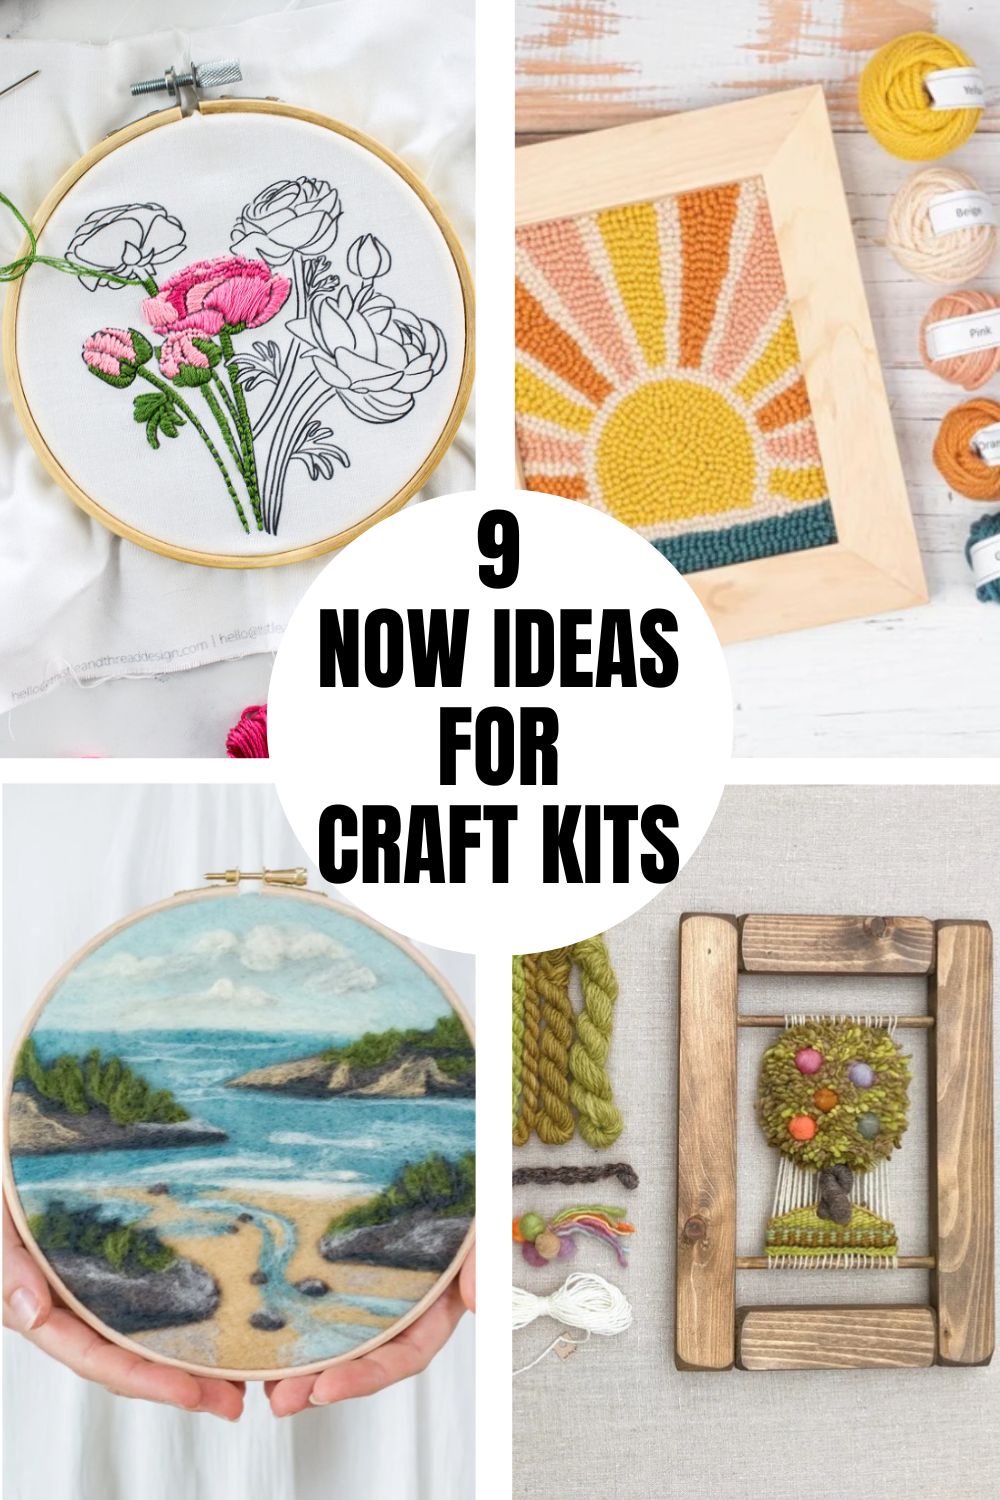 https://makeandtakes.com/wp-content/uploads/9-now-ideas-for-craft-kits-for-teens-and-adults.jpg